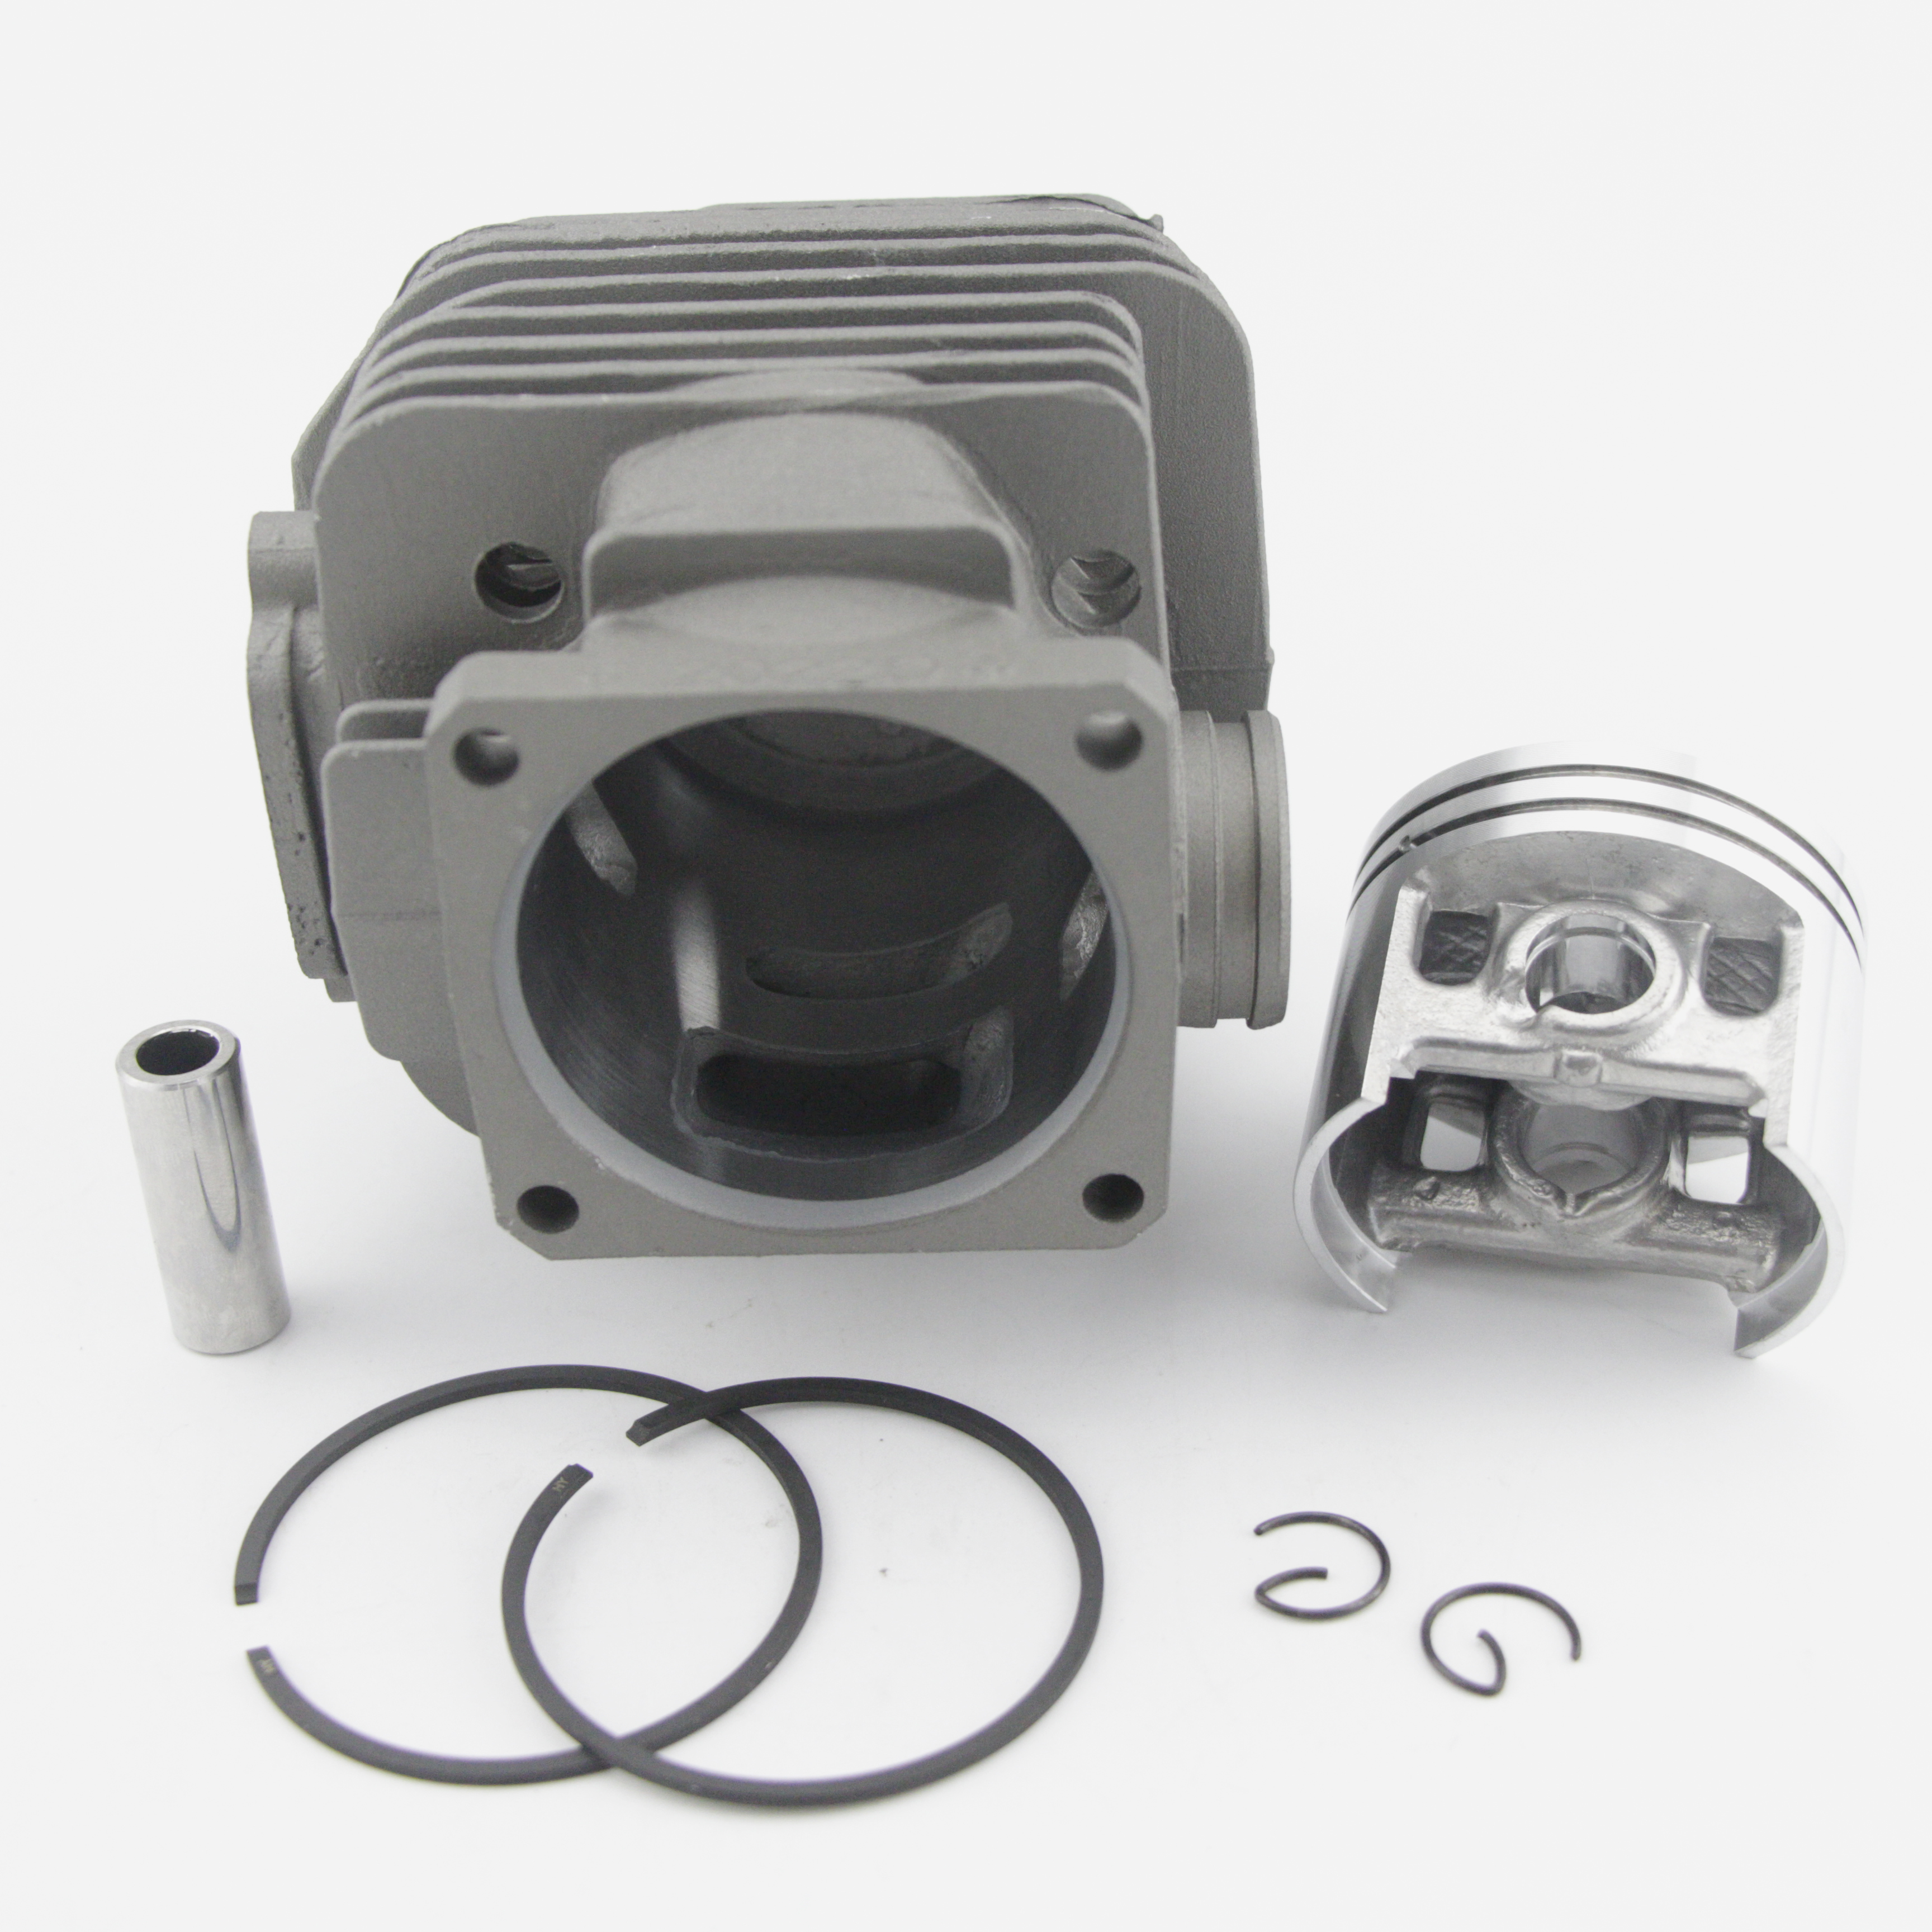 52mm Cylinder Piston Kit For Stihl 038 Magnum MS380 Chainsaw 1119 020 1202 With Pin Ring Circlip